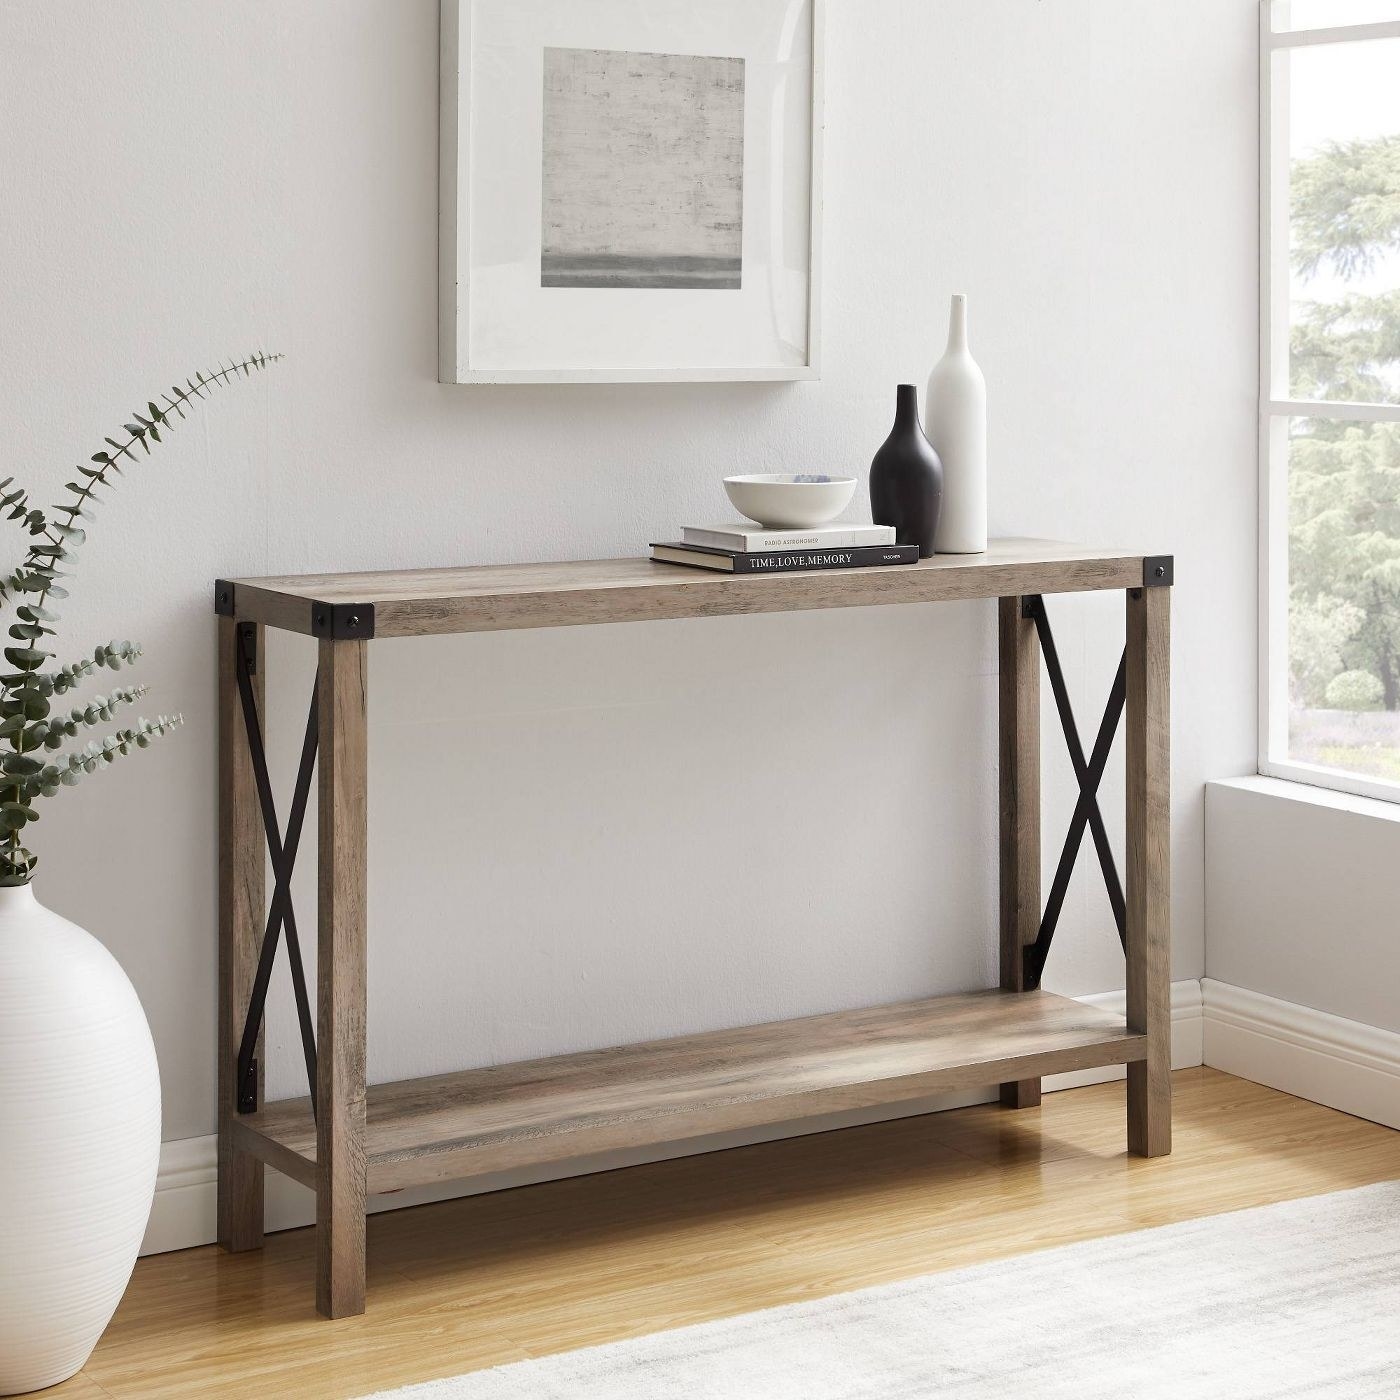 gray wood rustic farmhouse console table against a white wall